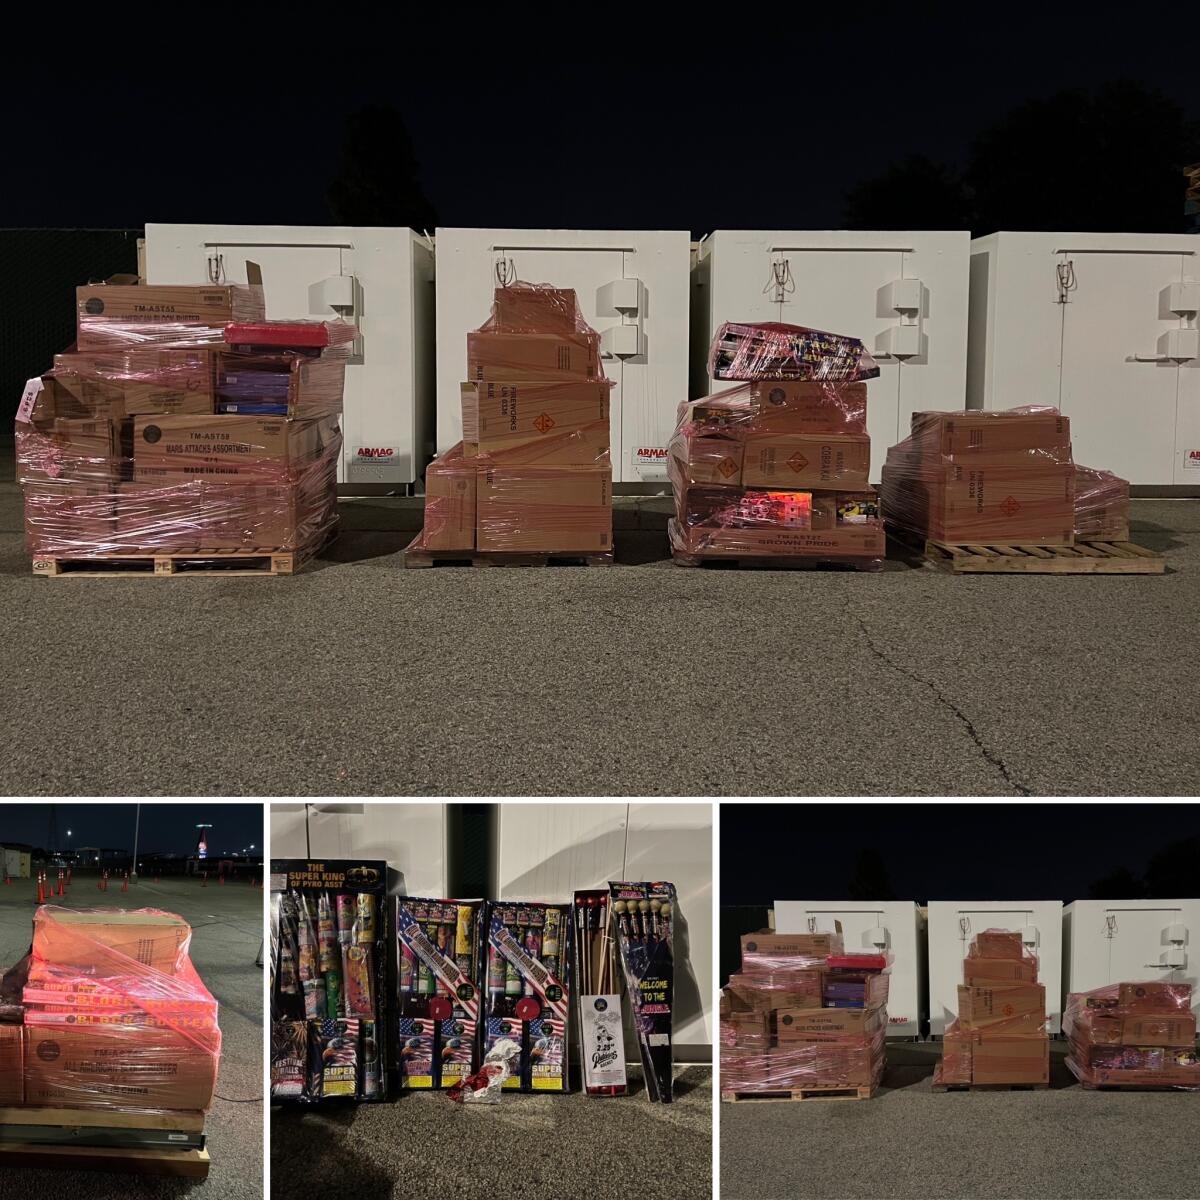 Costa Mesa police confiscated about 2,300 pounds of illegal fireworks on June 8.